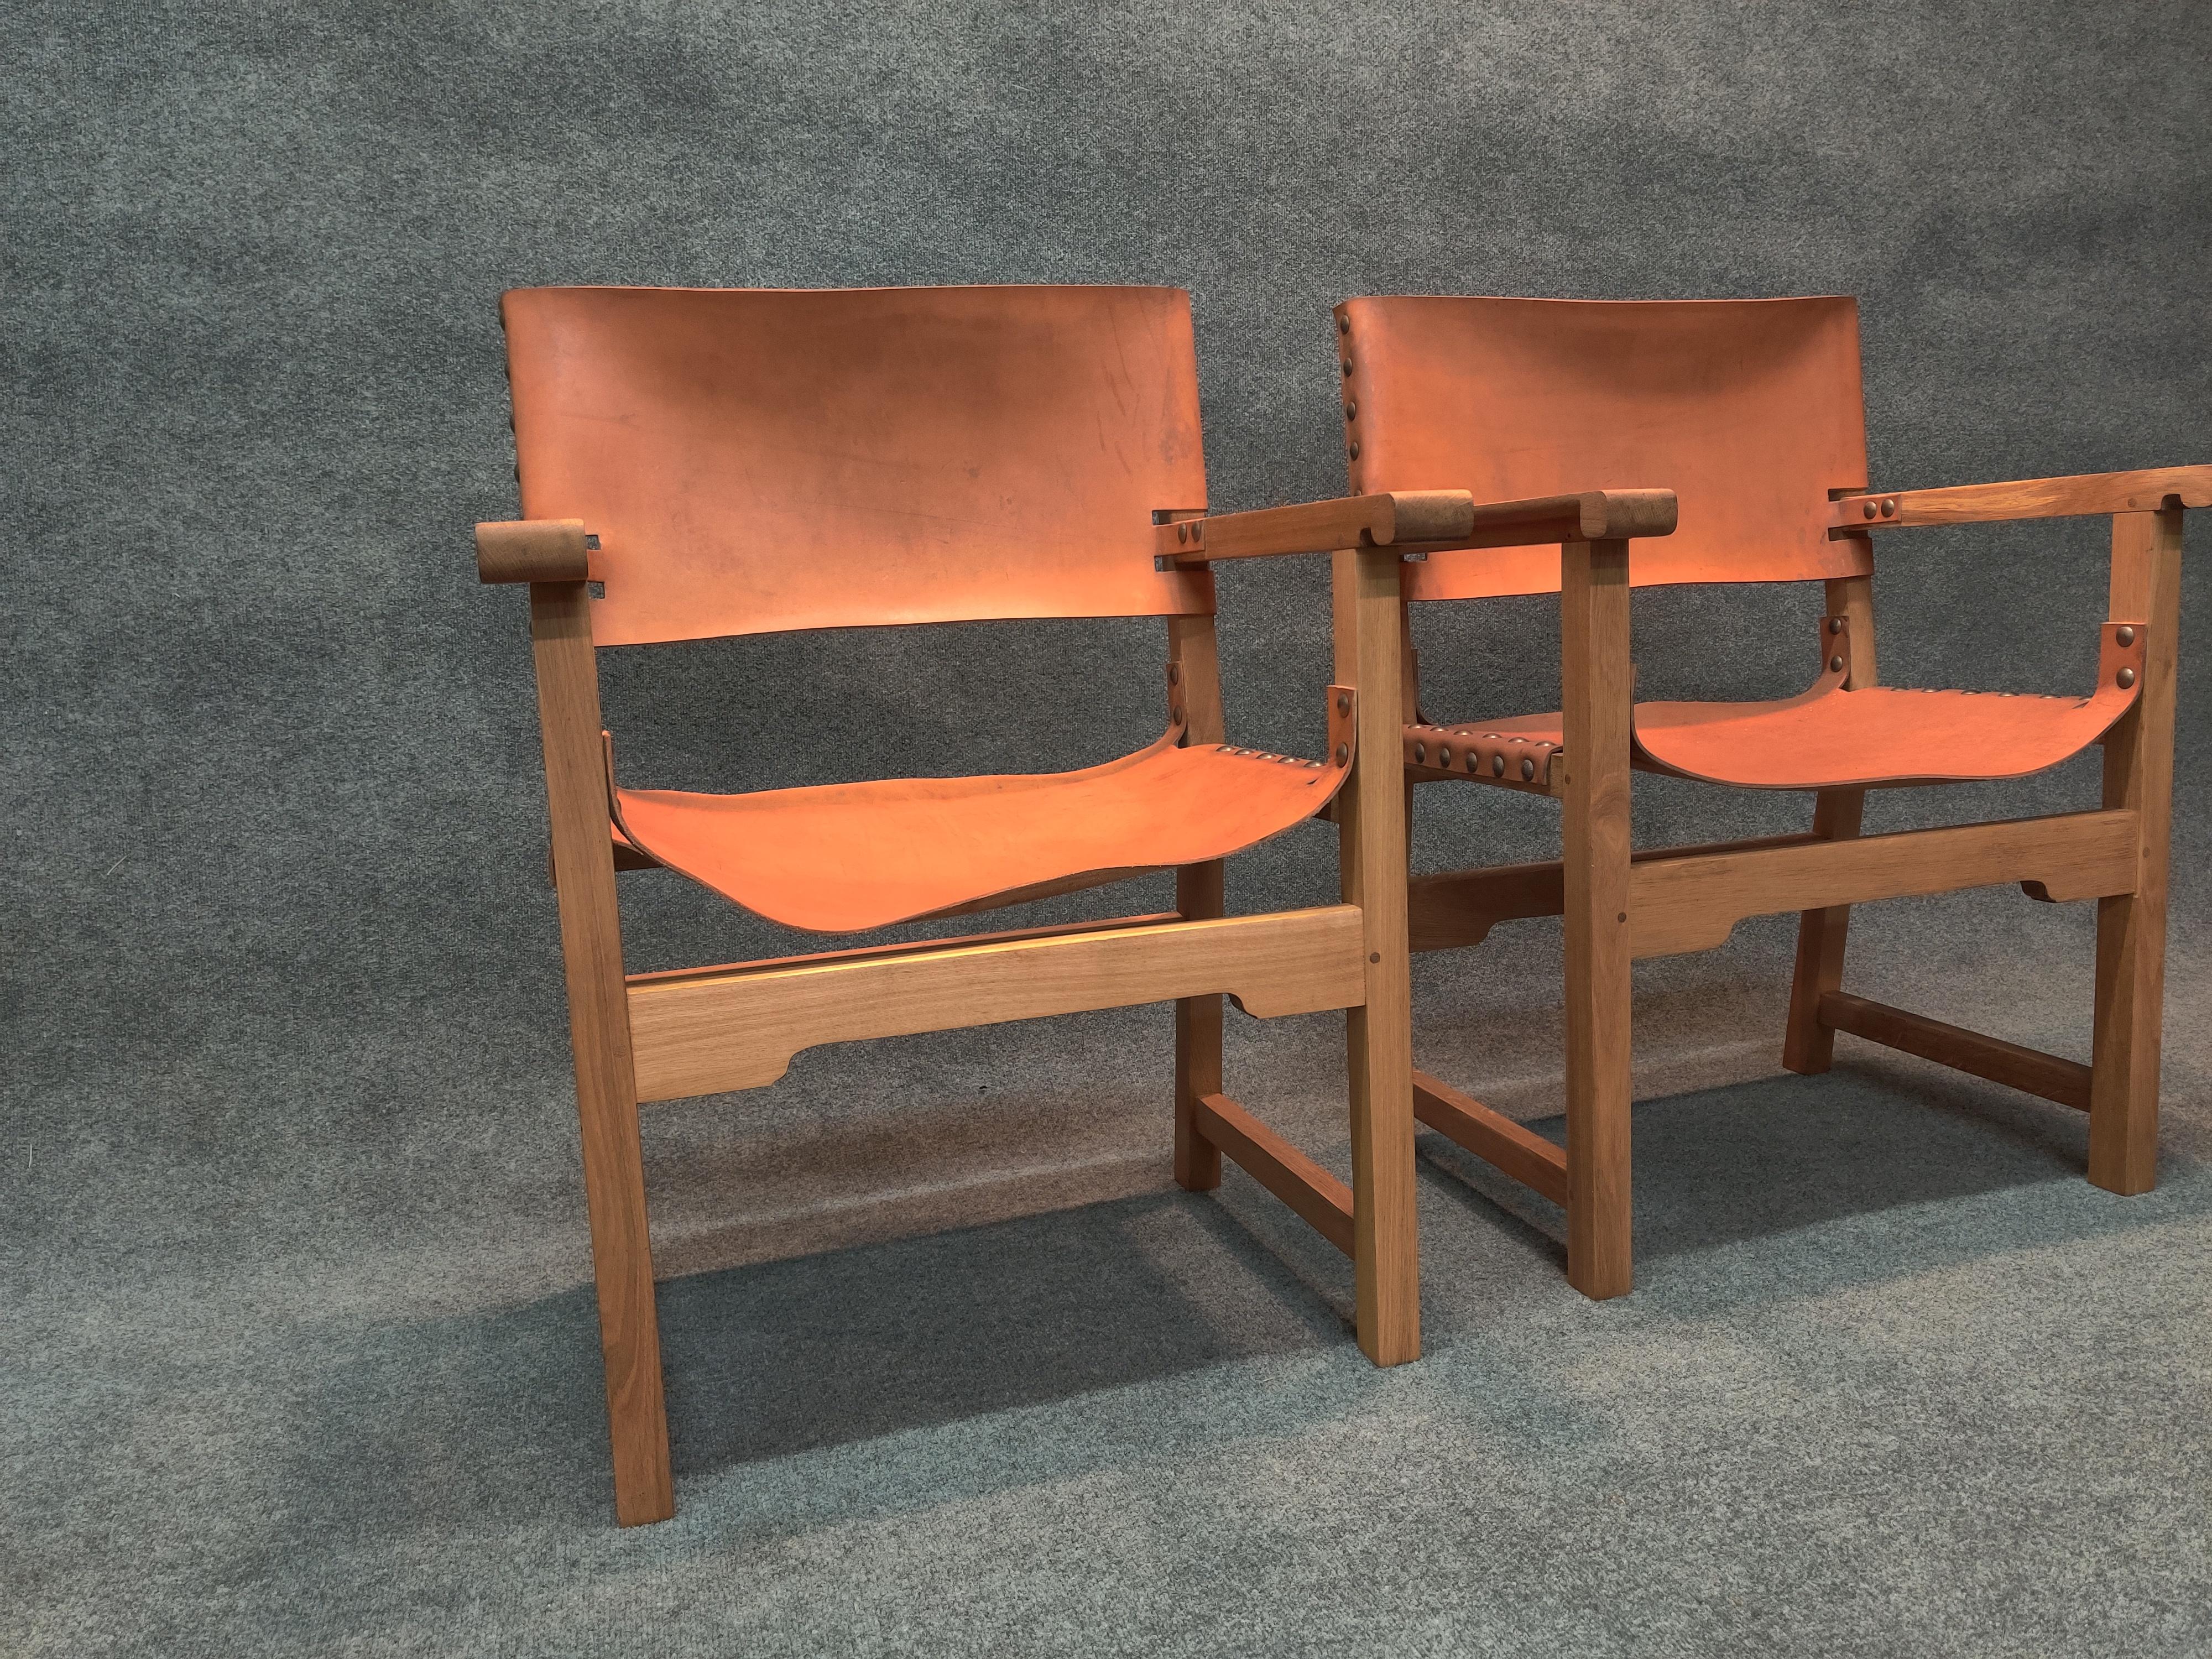 Pair of handsome and well-made director style armchairs. High quality construction and materials are evident. Frames are constructed of white oak in a natural finish. Seats and backs are of saddle leather and are secured with large brass studs. Some